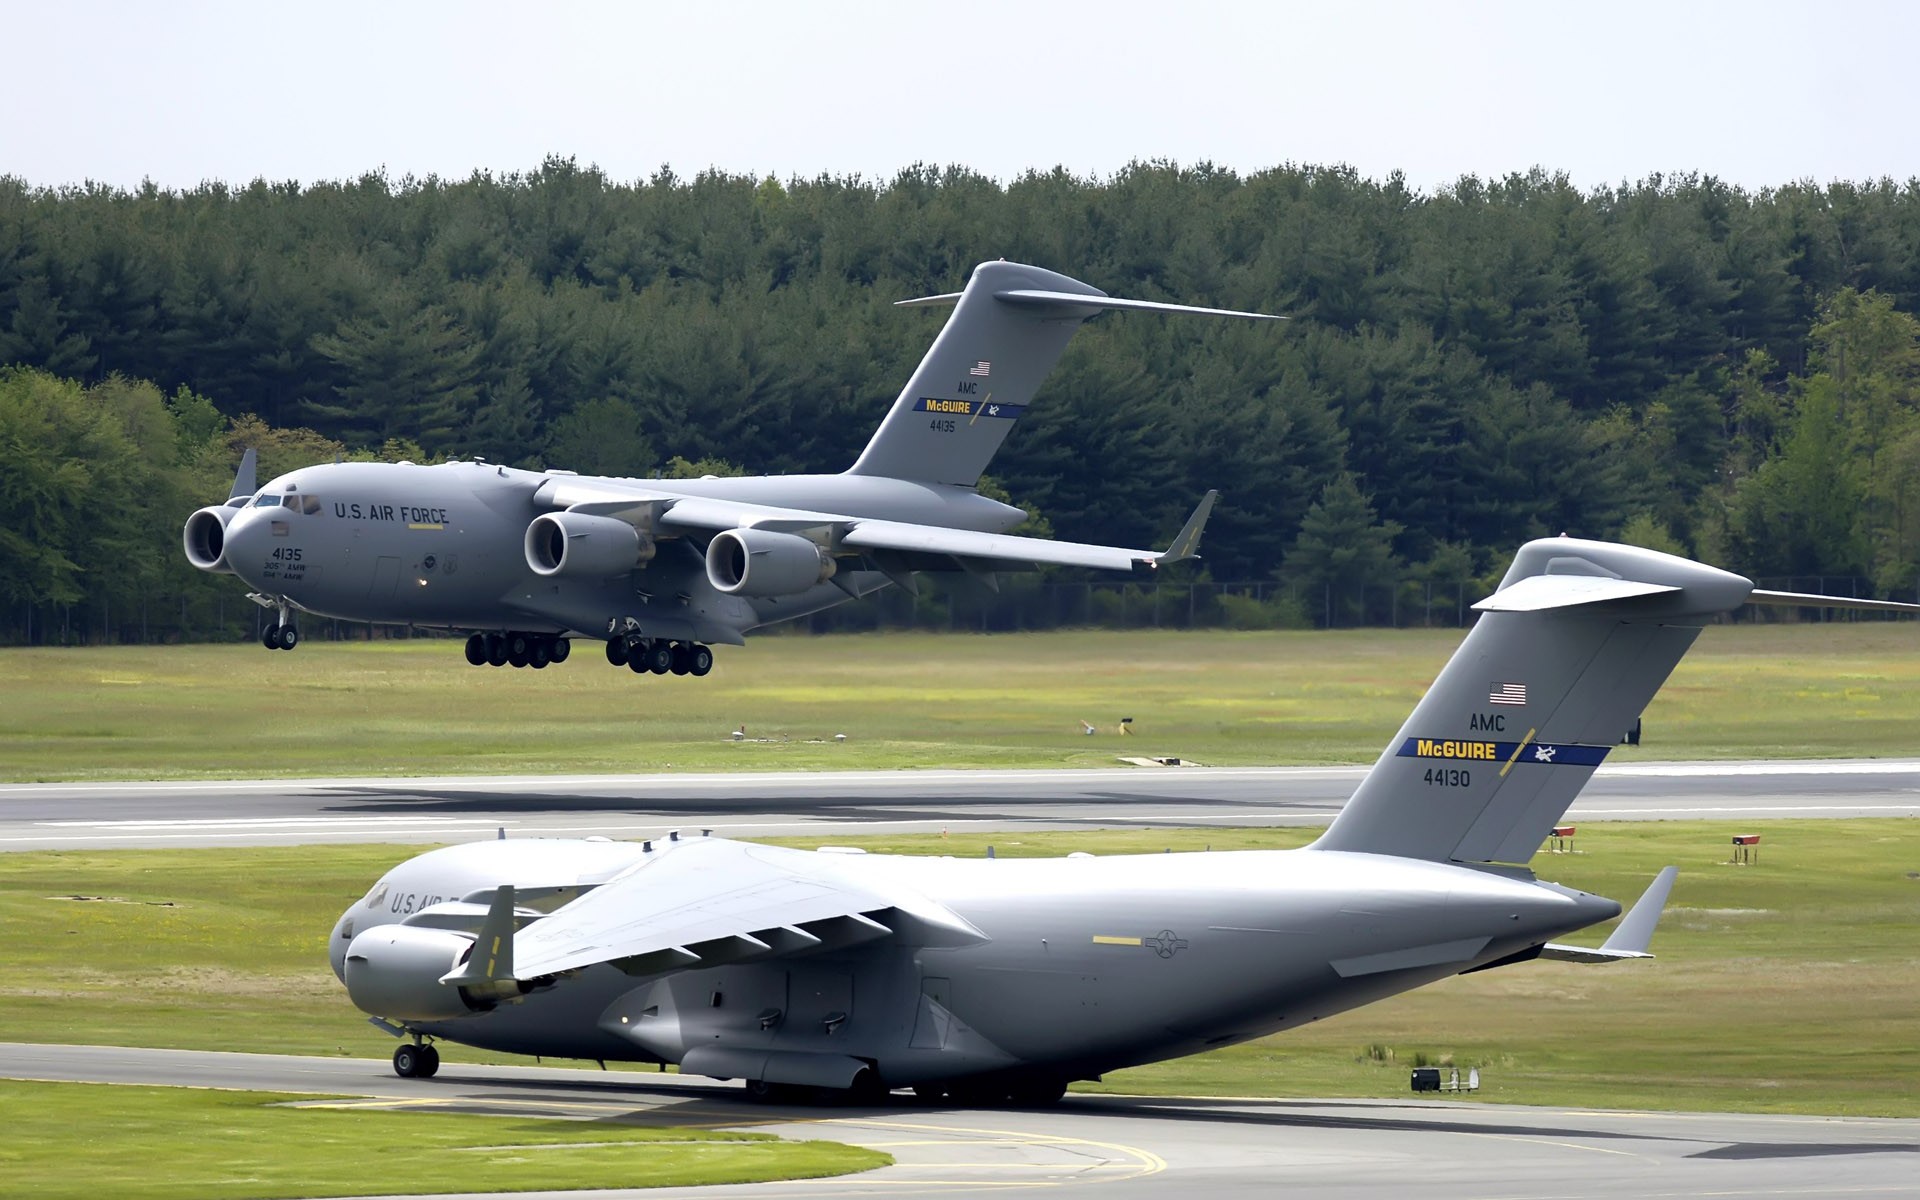 General 1920x1200 airplane aircraft military vehicle vehicle military aircraft military Boeing C-17 Globemaster III American aircraft US Air Force Boeing